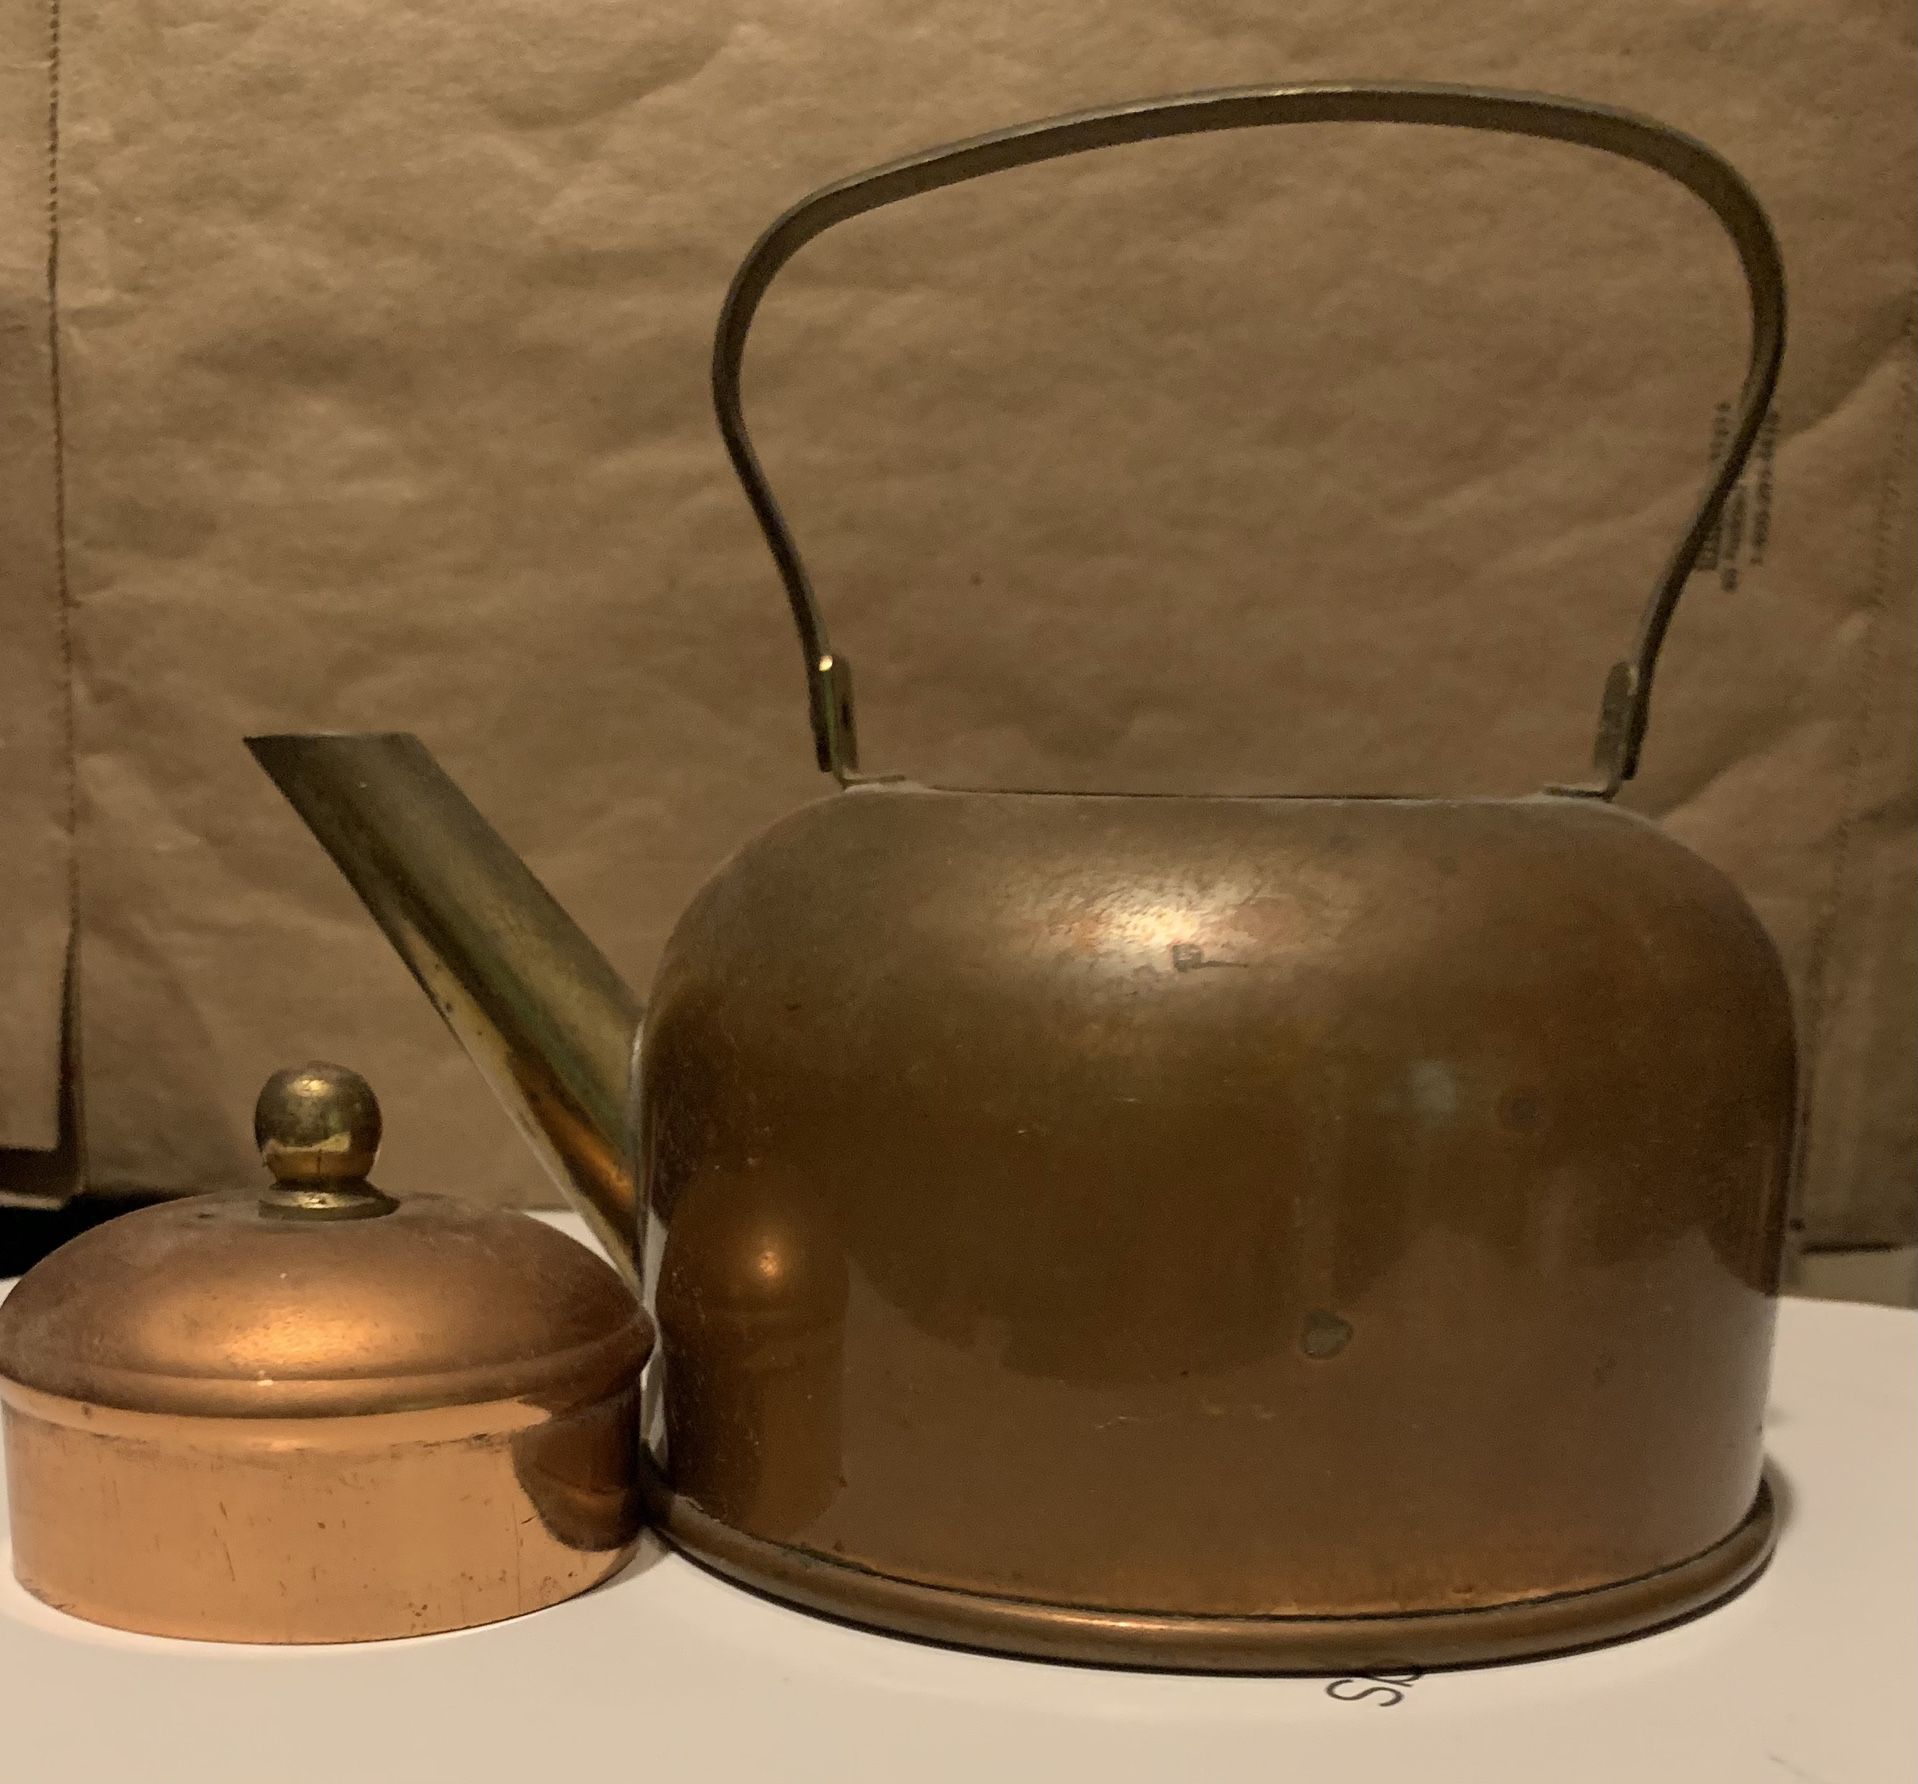 Antique Brass Hand Crafted Tea Kettle. Holds two cups. 